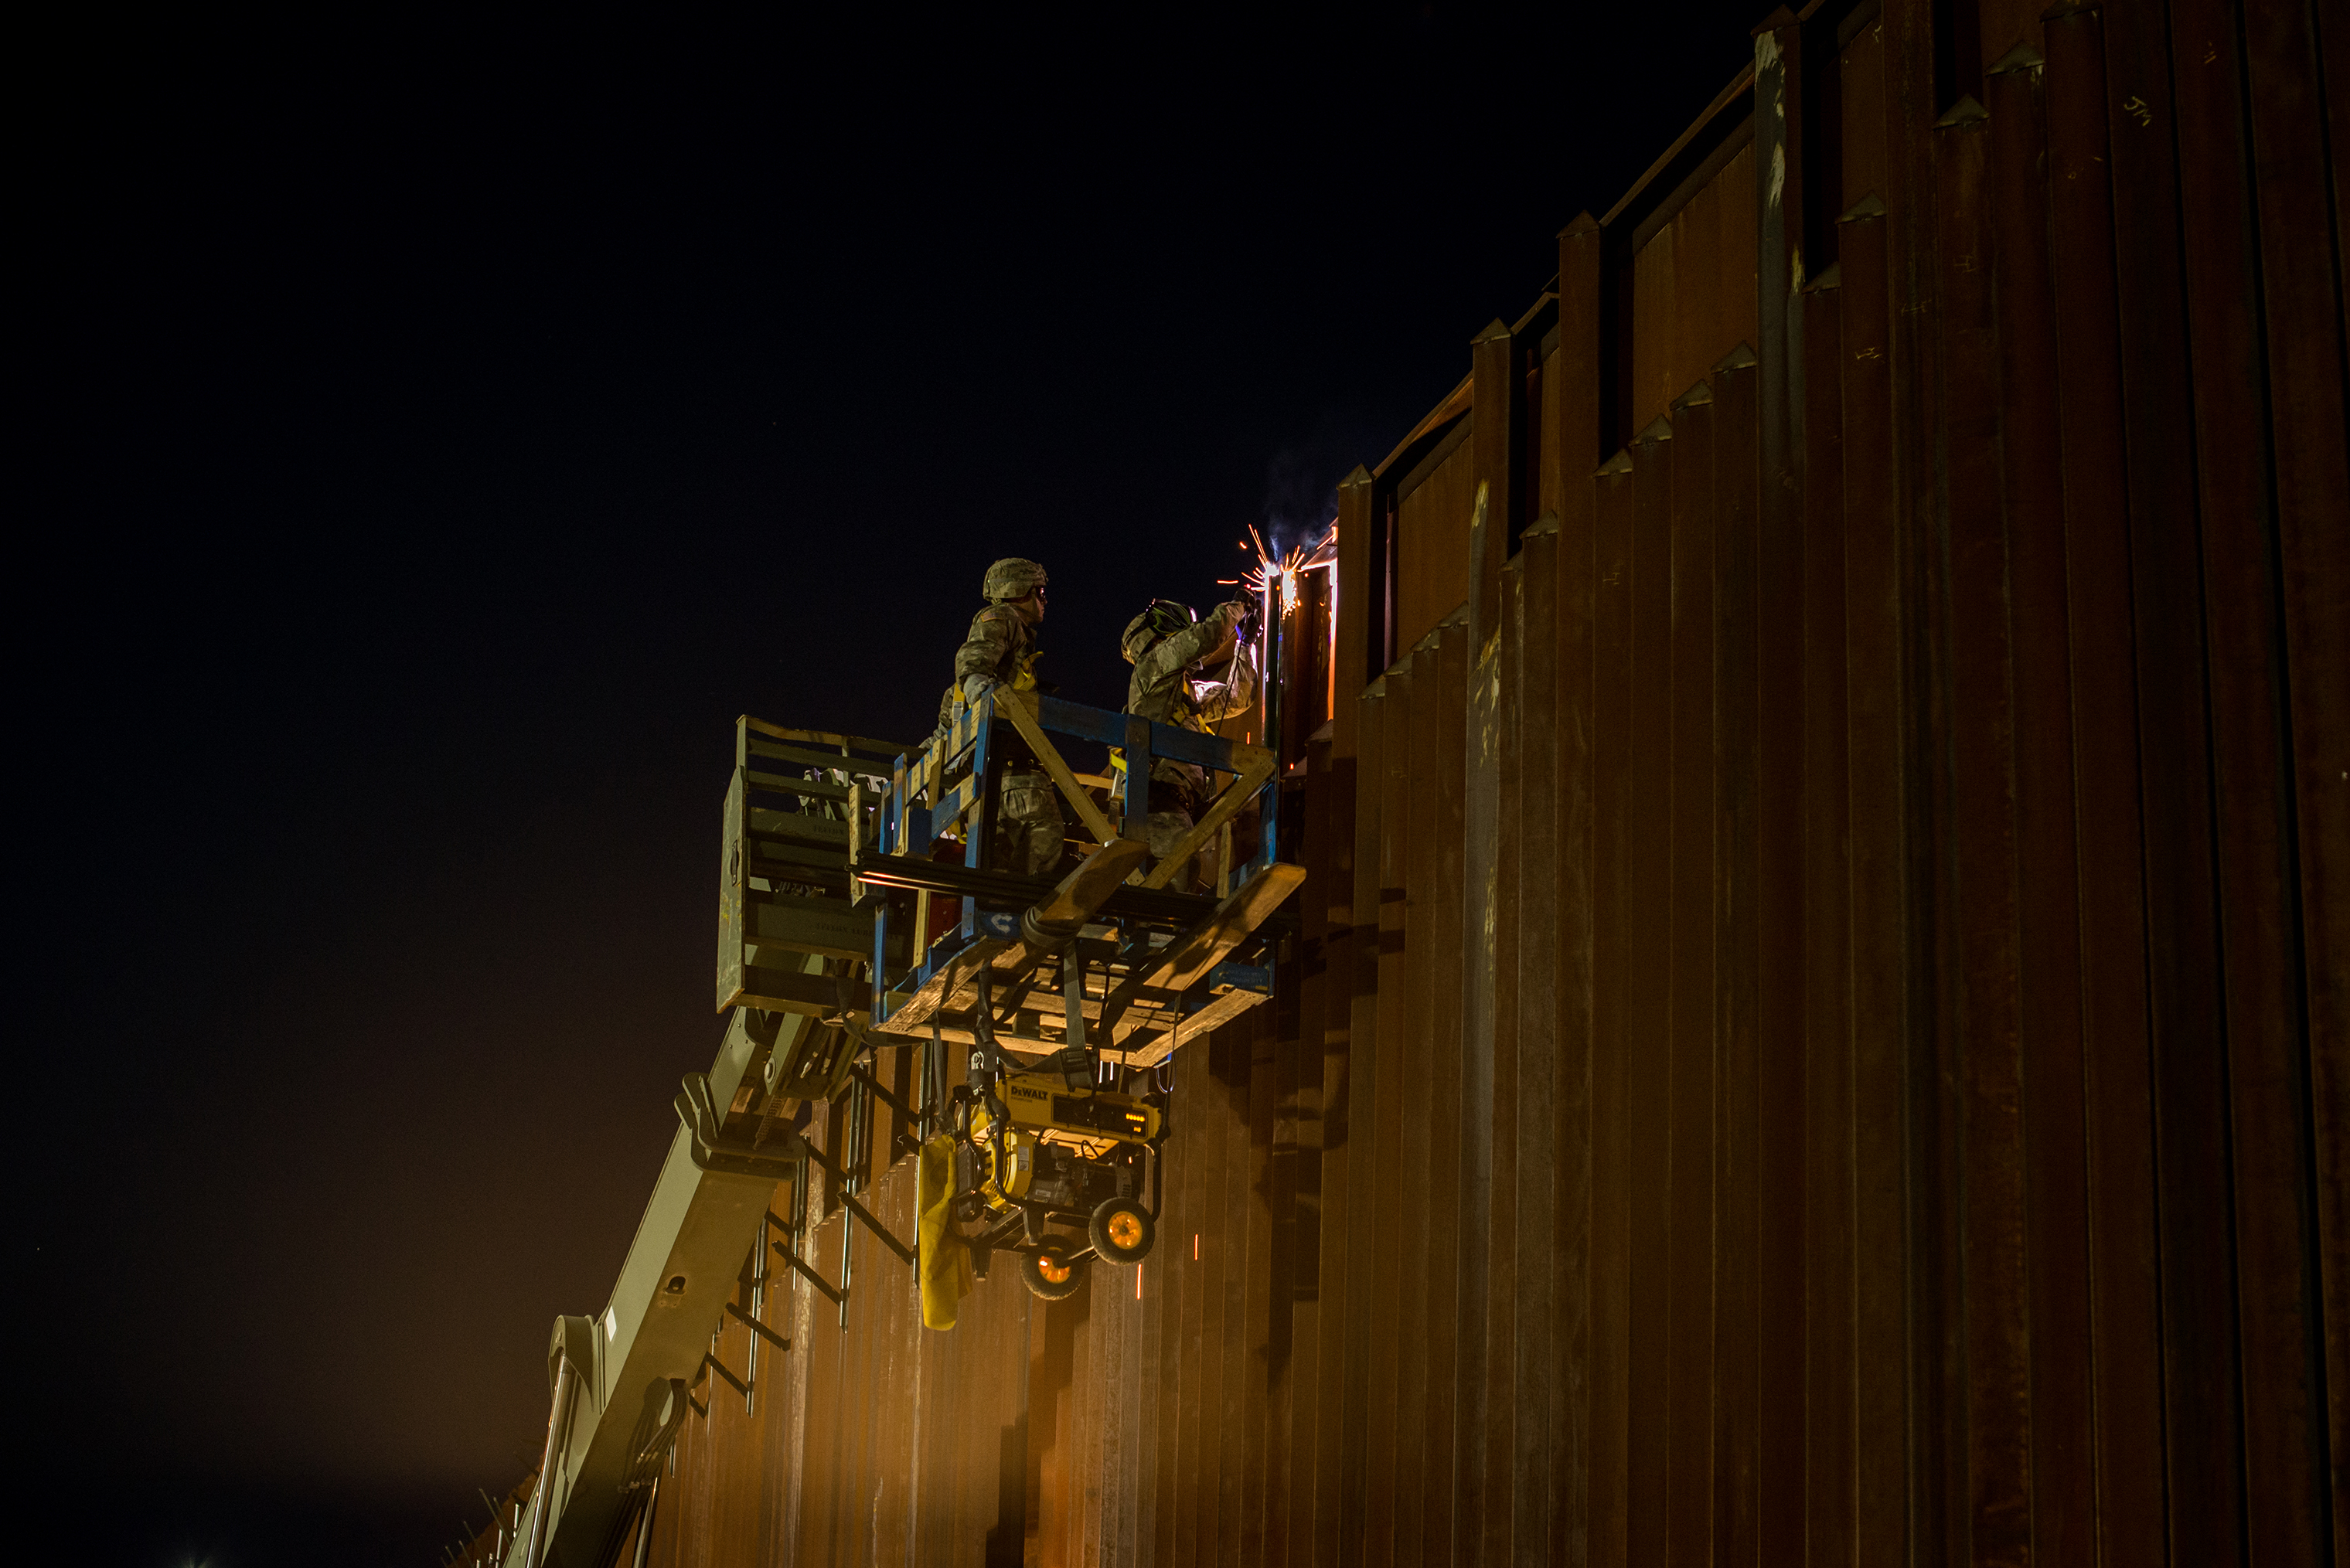 Soldiers of the 104th Engineer Construction Company weld brackets for concertina wire along the border wall. (Meridith Kohut for TIME)